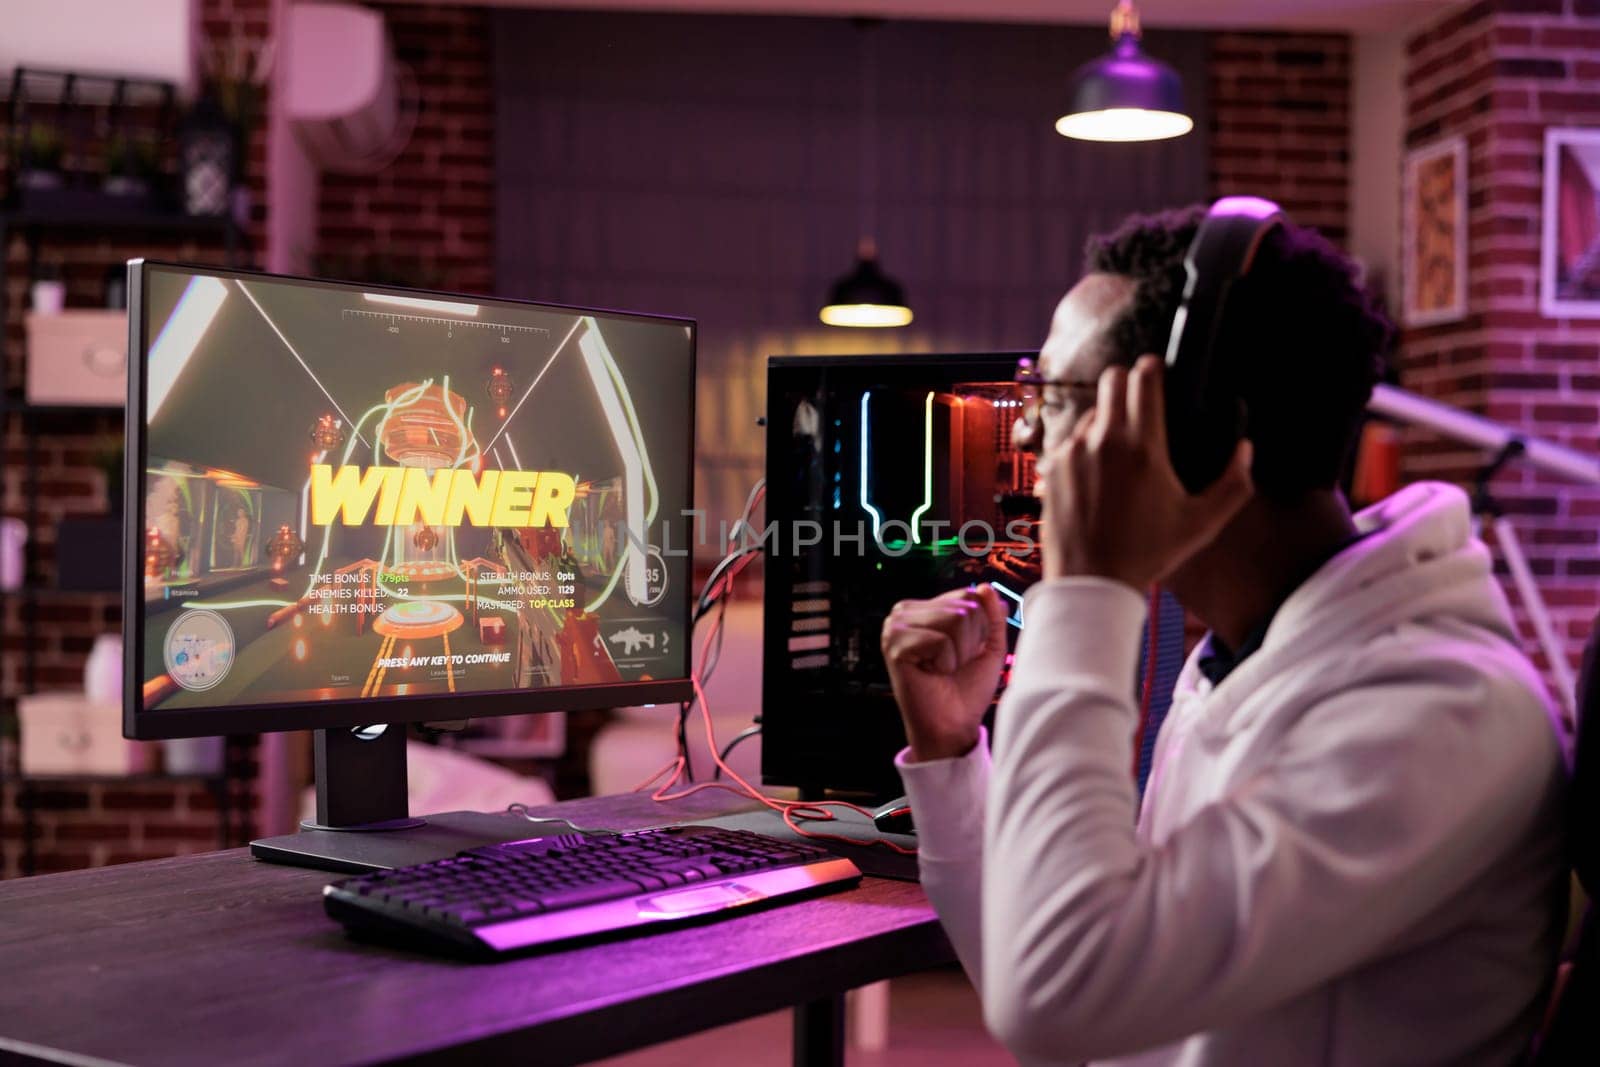 African american gamer excited about winning online multiplayer match against other players. Man seeing winner message on gaming PC computer display in neon lights living room